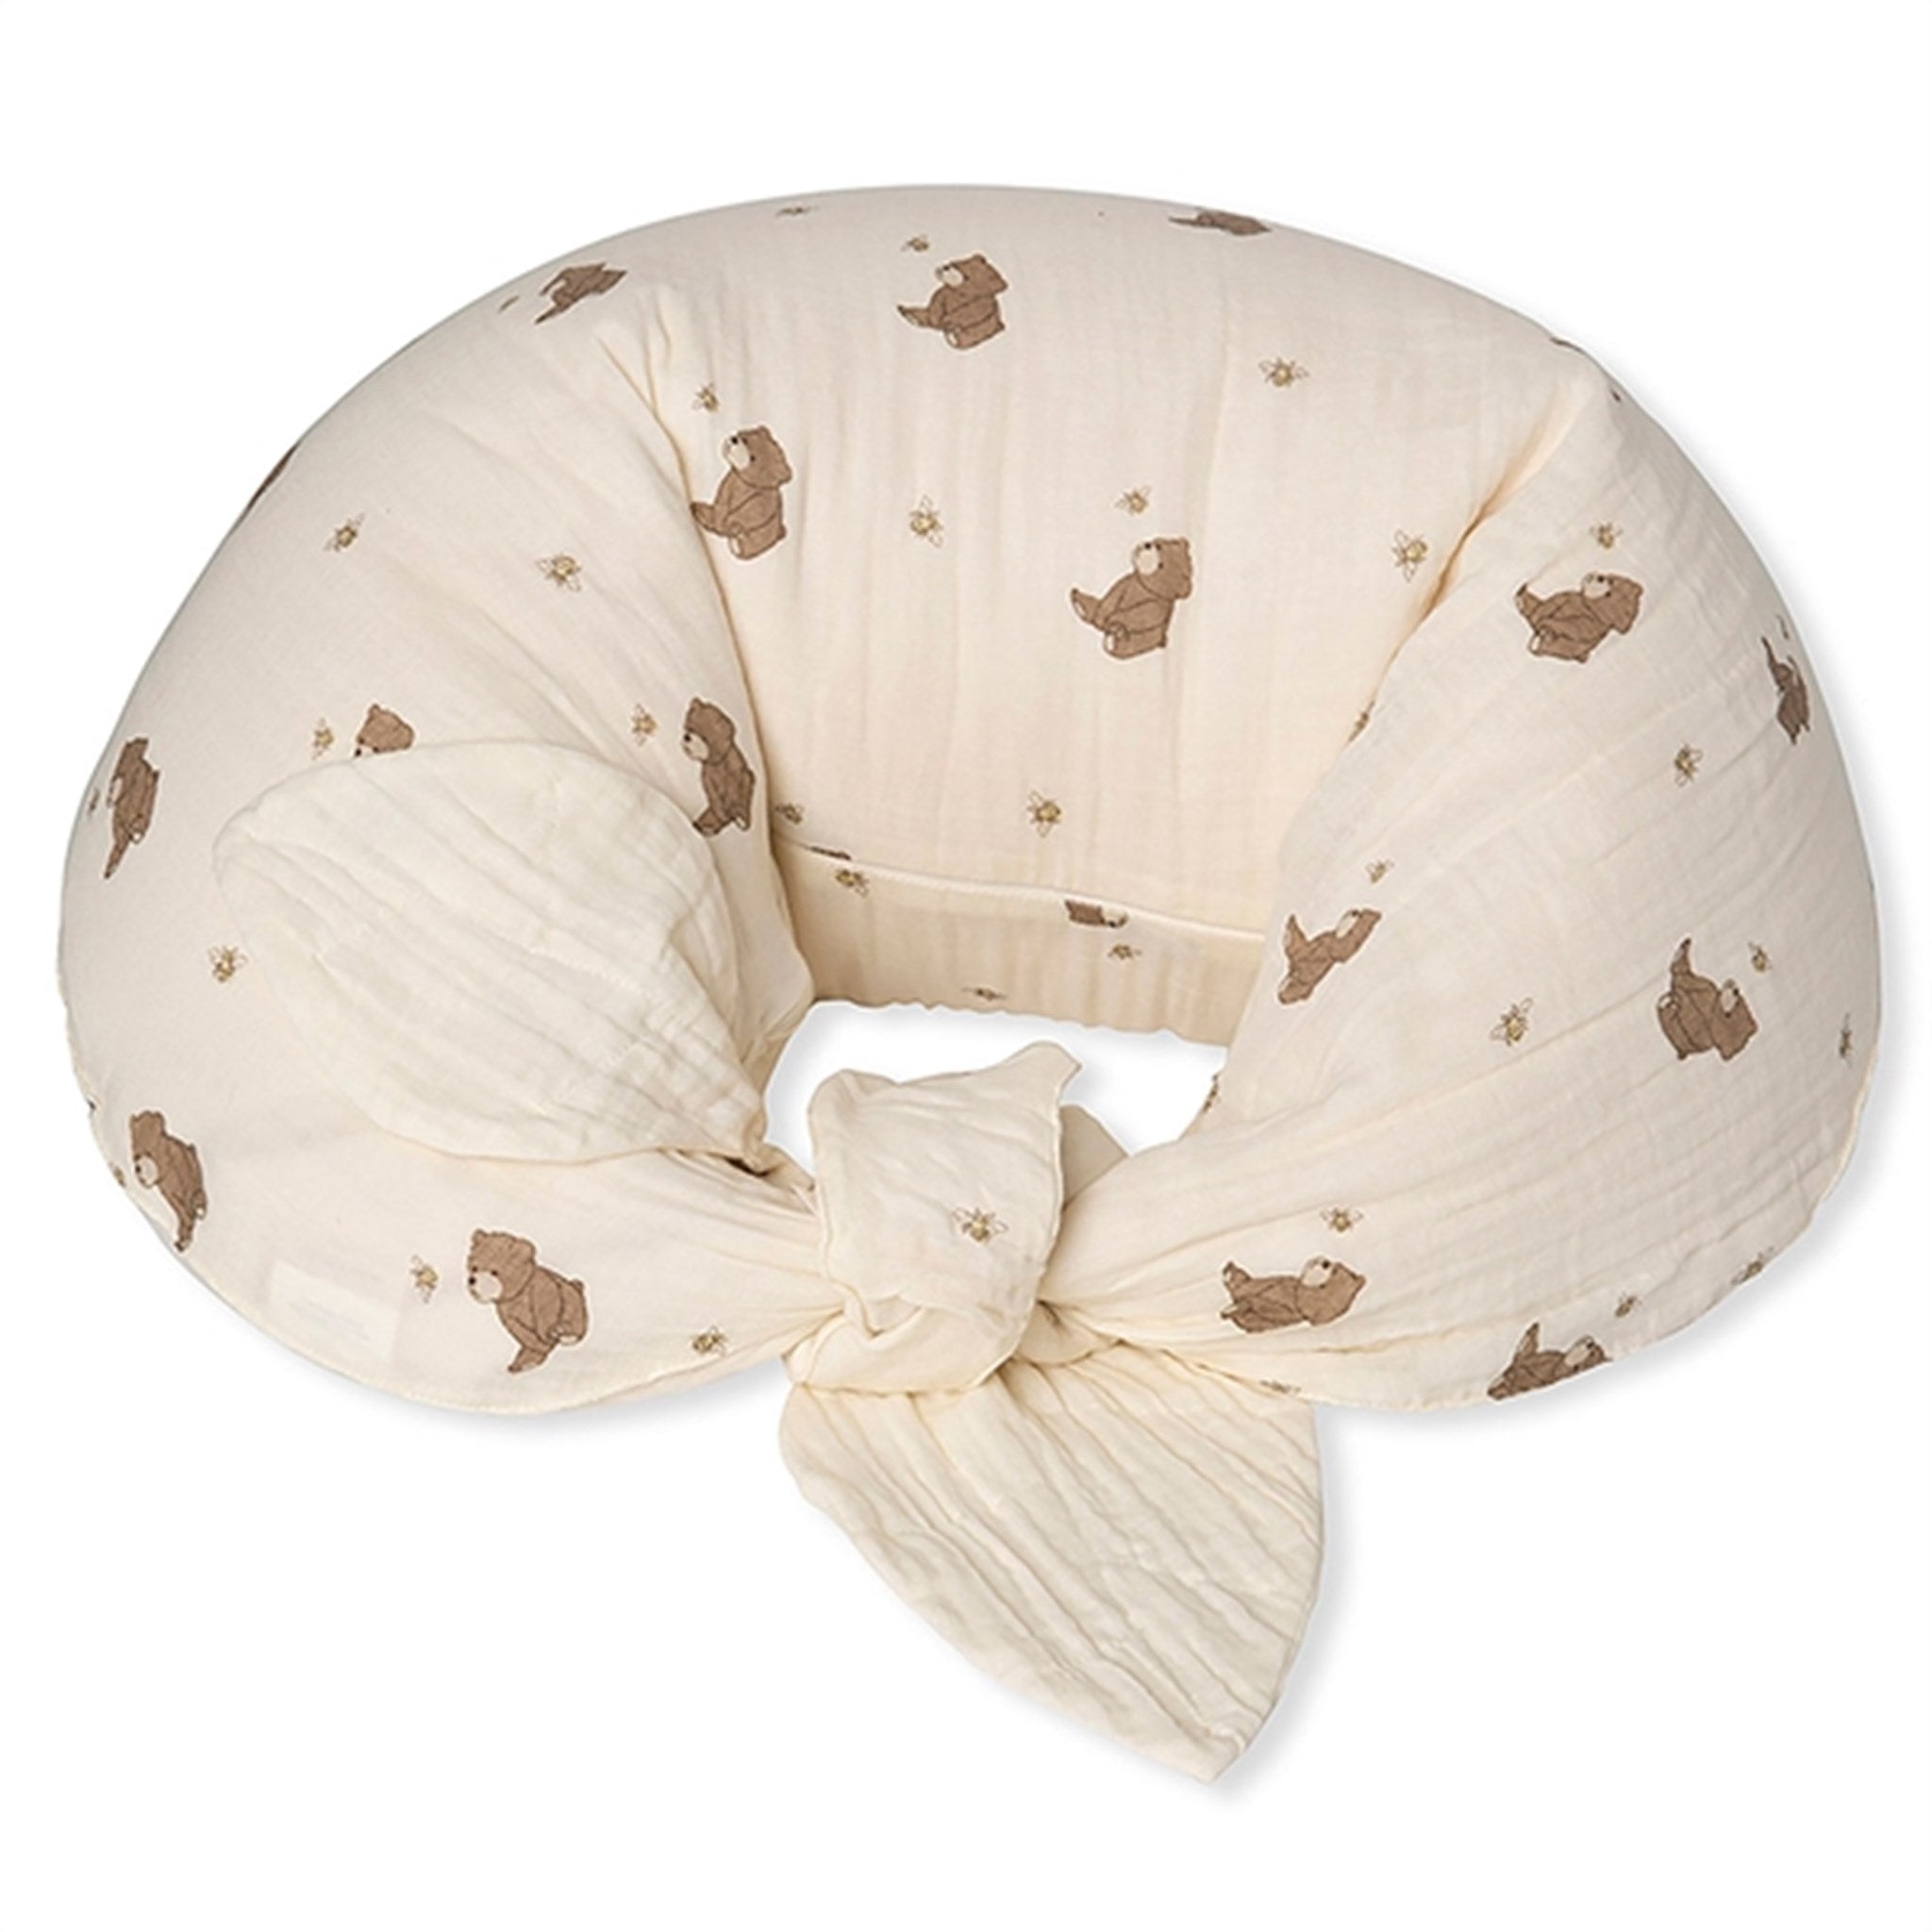 That's Mine Bees and Bears Moon Nursing Pillow